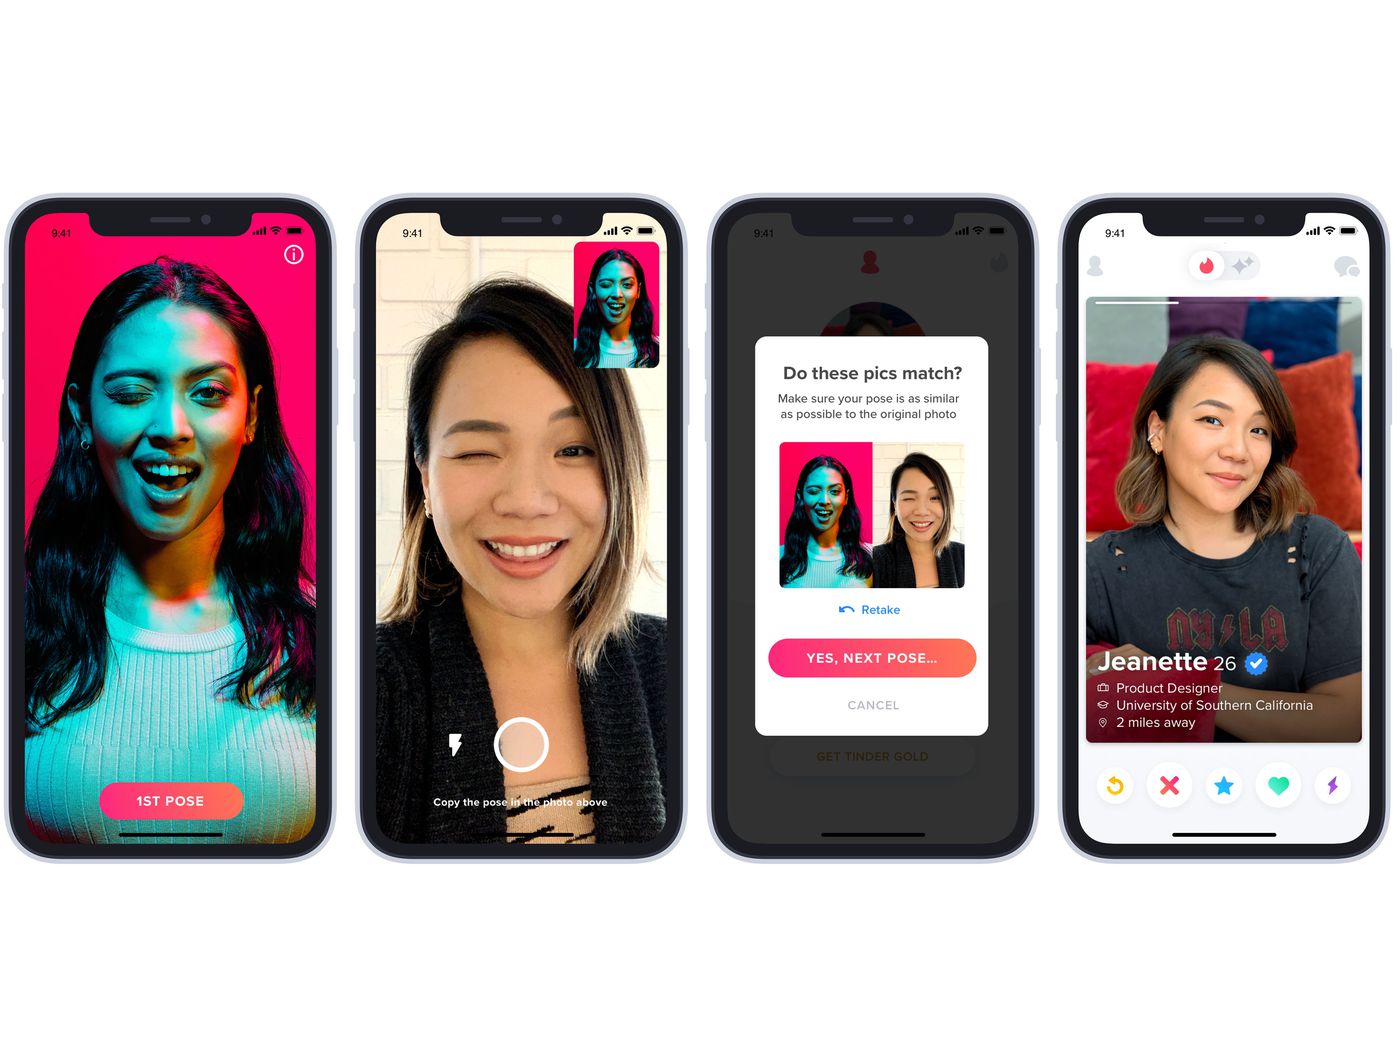 Tinder introduces Photo Verification feature to avoid catfishing: Here is how to use it